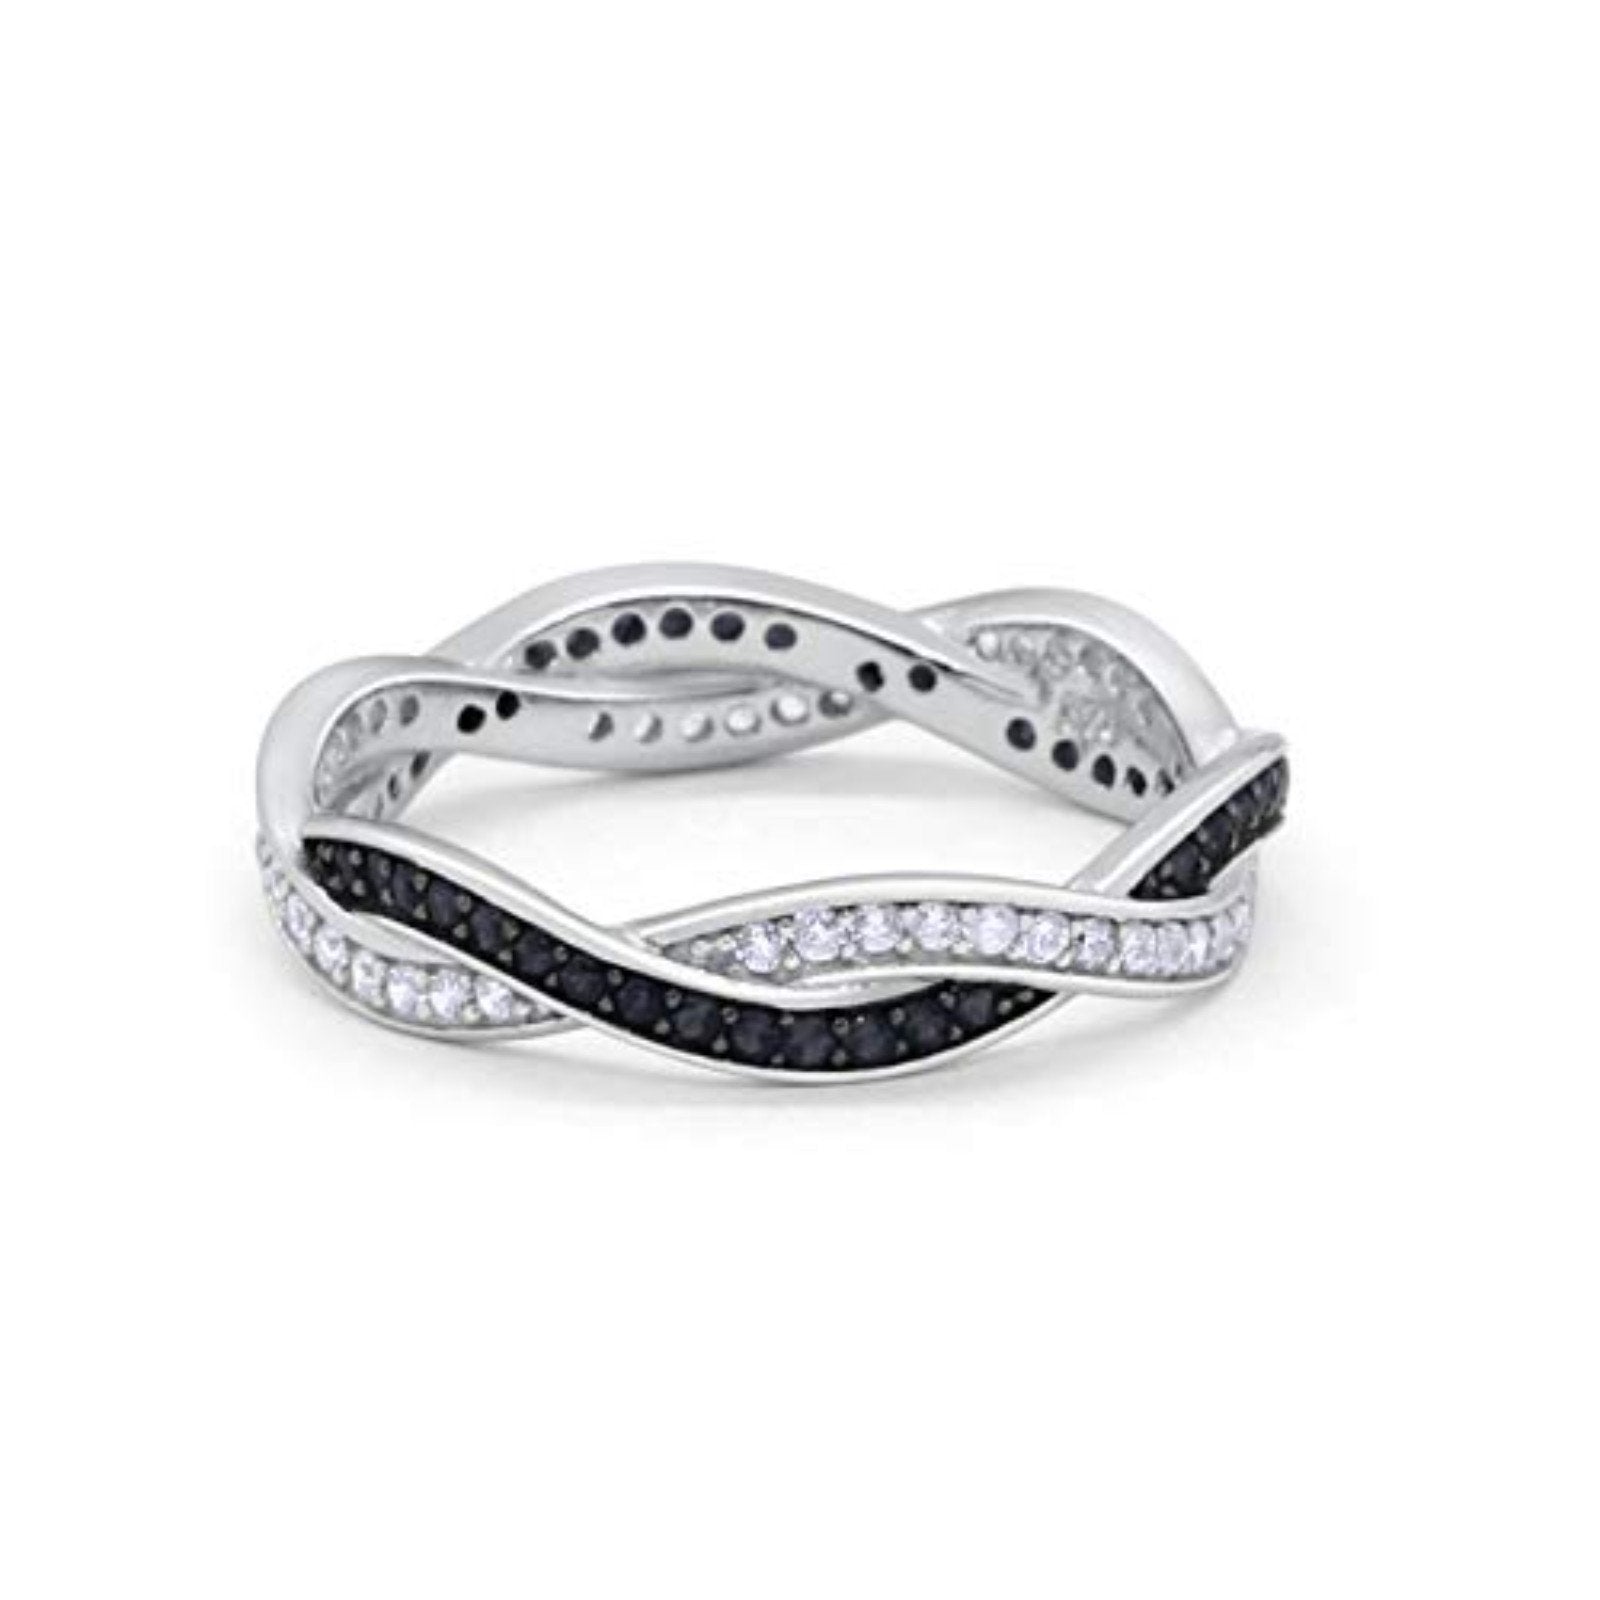 Crisscross Braided Weave Design Band Ring Round Eternity Simulated Black CZ 925 Sterling Silver